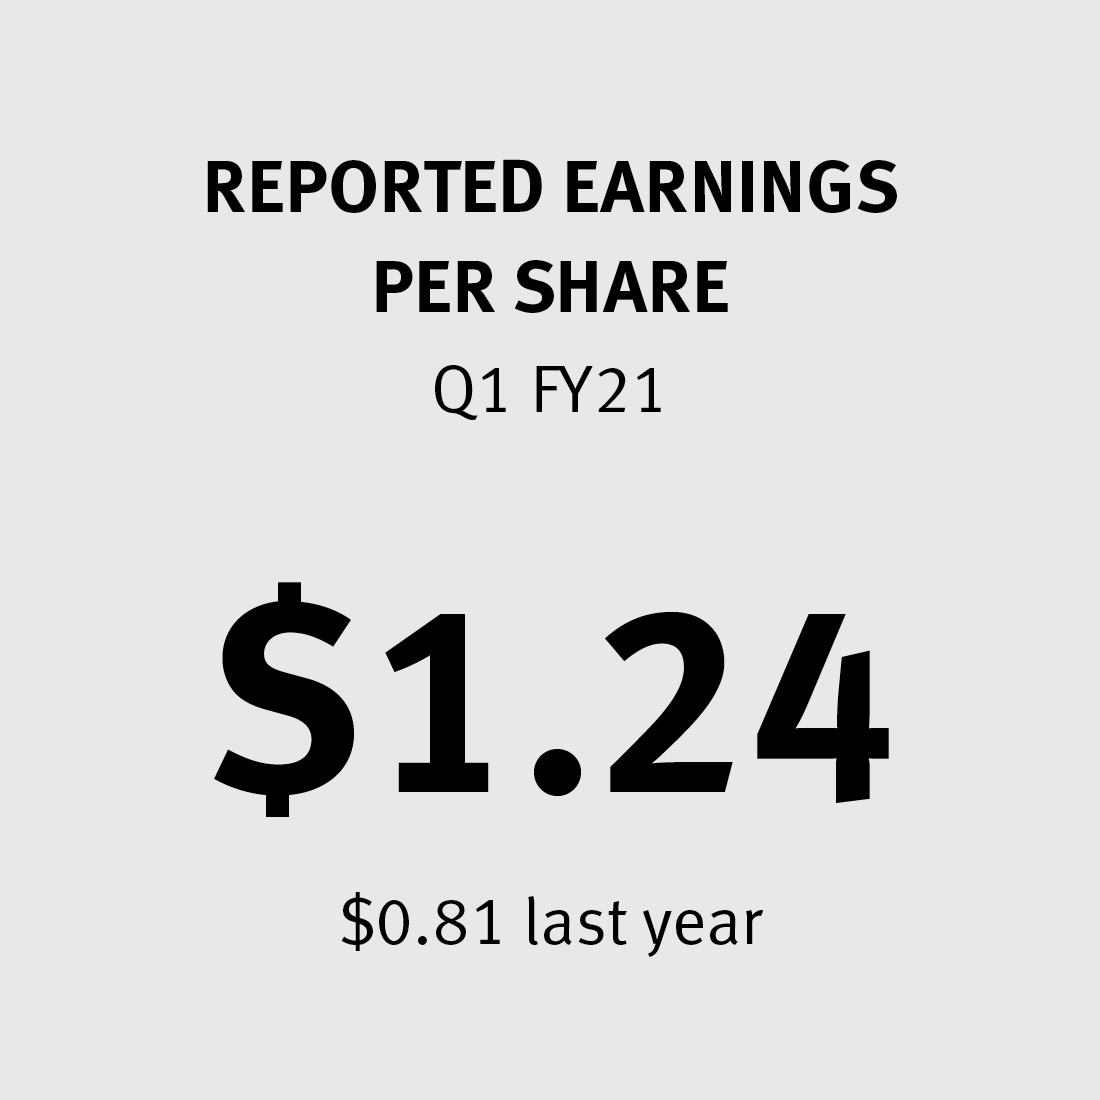 Reported Earnings per Share $1.24 ($0.81 last year)